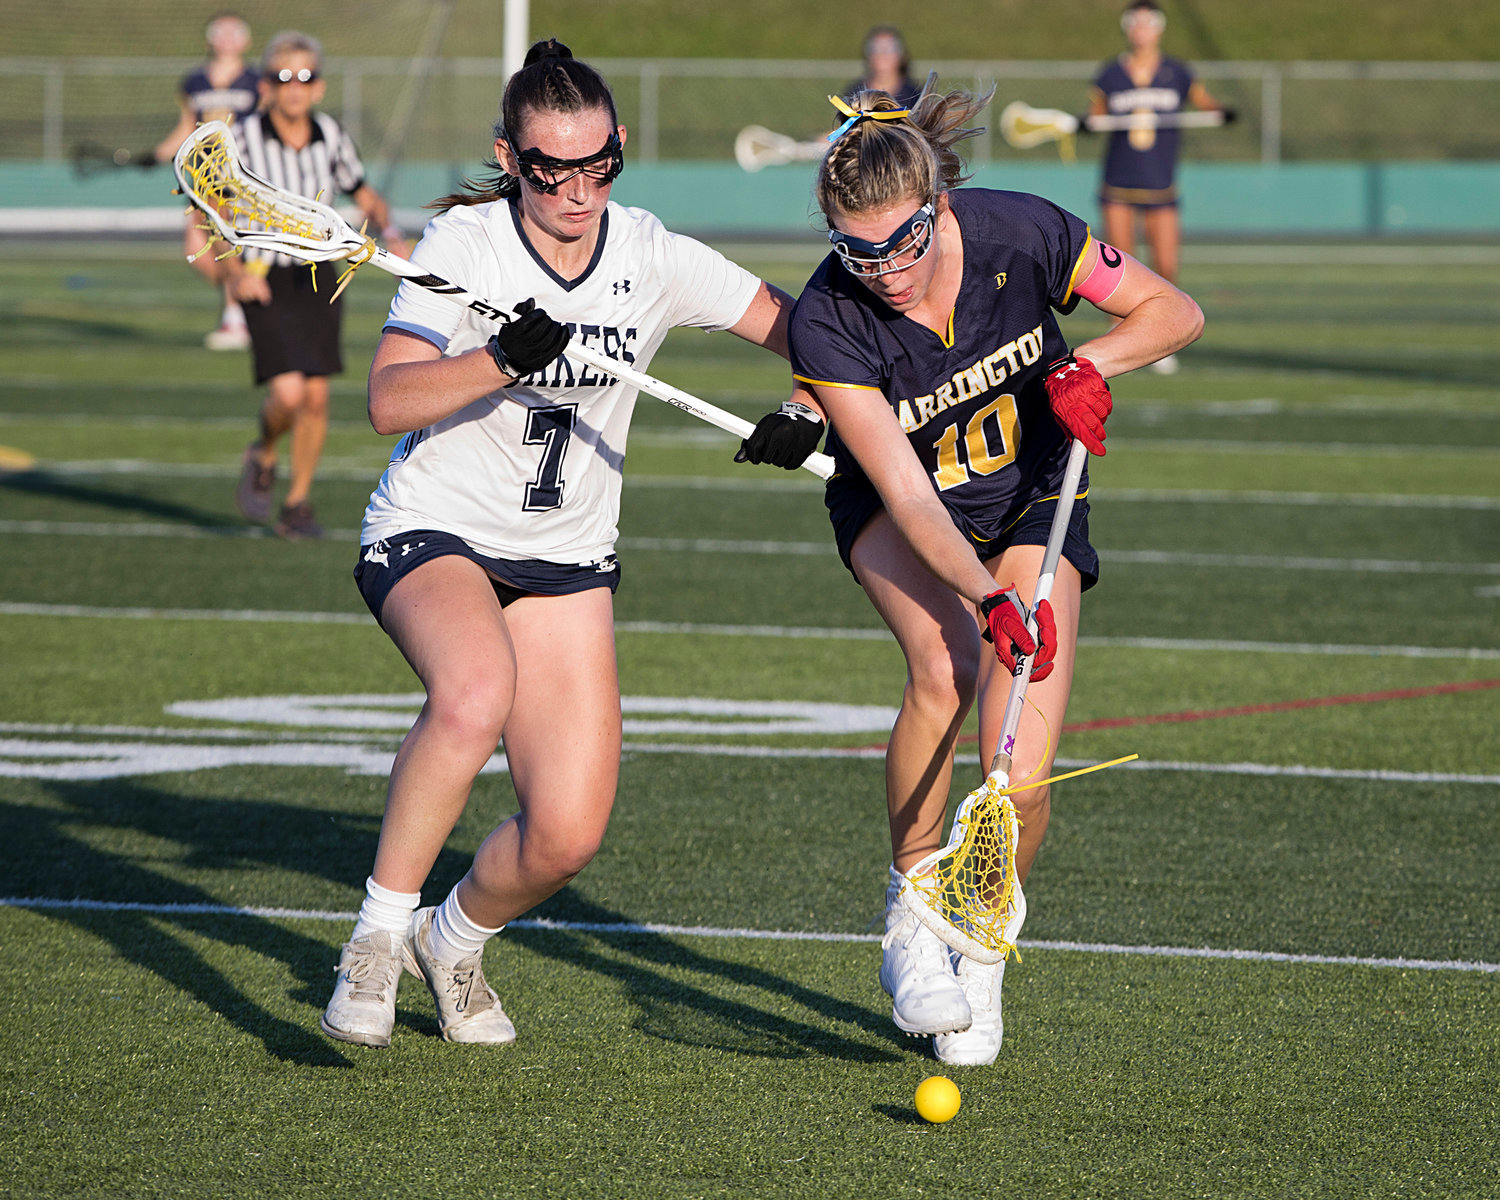 Barrington High School’s Kate Robertson (right), shown during the state championship game against Moses Brown, was recently named RI Girls Lacrosse Player of the Year.